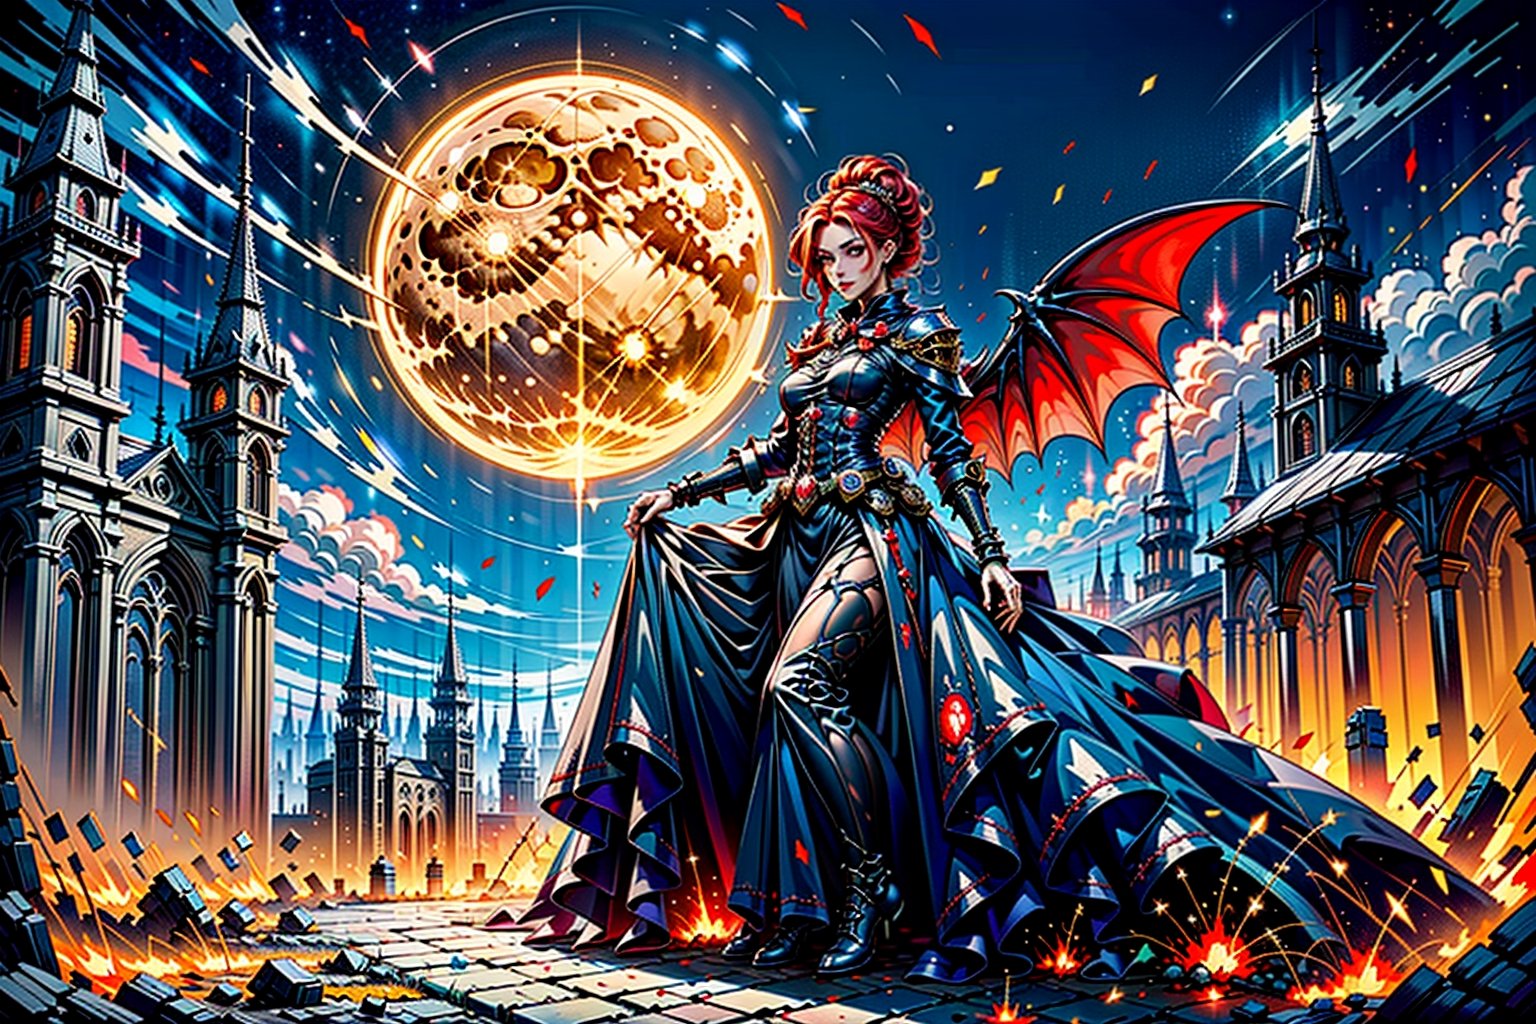 High definition vivid masterpiece, a beautiful vampire woman with red hair, elaborate braids, hair buns, messy hair, blowing hair, red glowing big detailed eyes, large tattered devil wings, realistic, steampunk, night time, in front of a gothic castle, gravestones, full moon, starry sky, dreamy, fantasy, mythical, magical, steampunk mechanical glowing full moon, light shafts, detailed background, boots, full body,horror